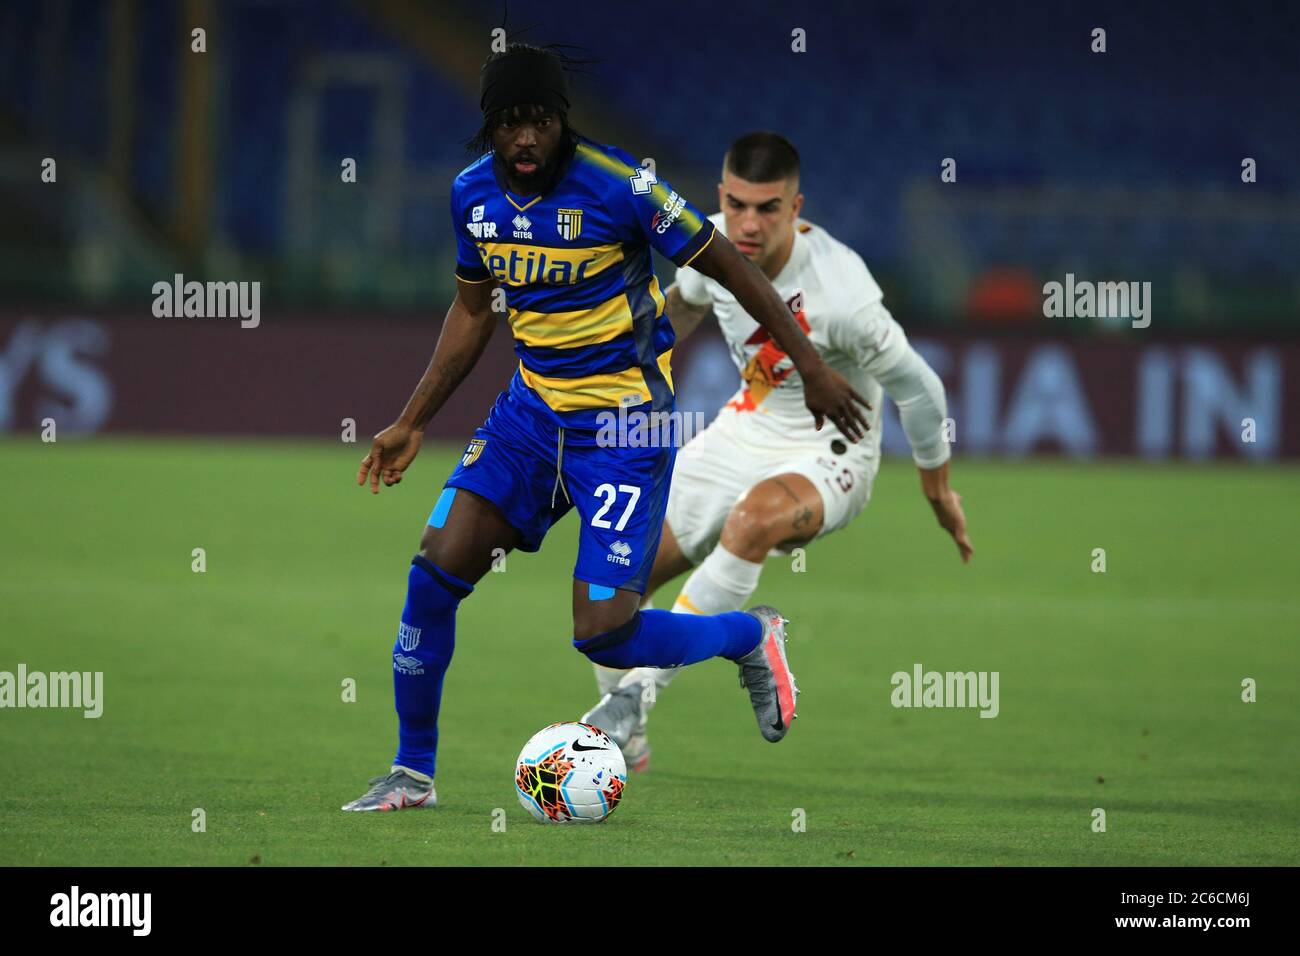 Rome, Italy. 08th July, 2020. Gervinho (Parma) in action during the Serie A Tim match between AS Roma and Parma Calcio 1913 at Stadio Olimpico on July 08, 2020 in Rome, Italy. (Photo by Giuseppe Fama/Pacific Press) Credit: Pacific Press Agency/Alamy Live News Stock Photo